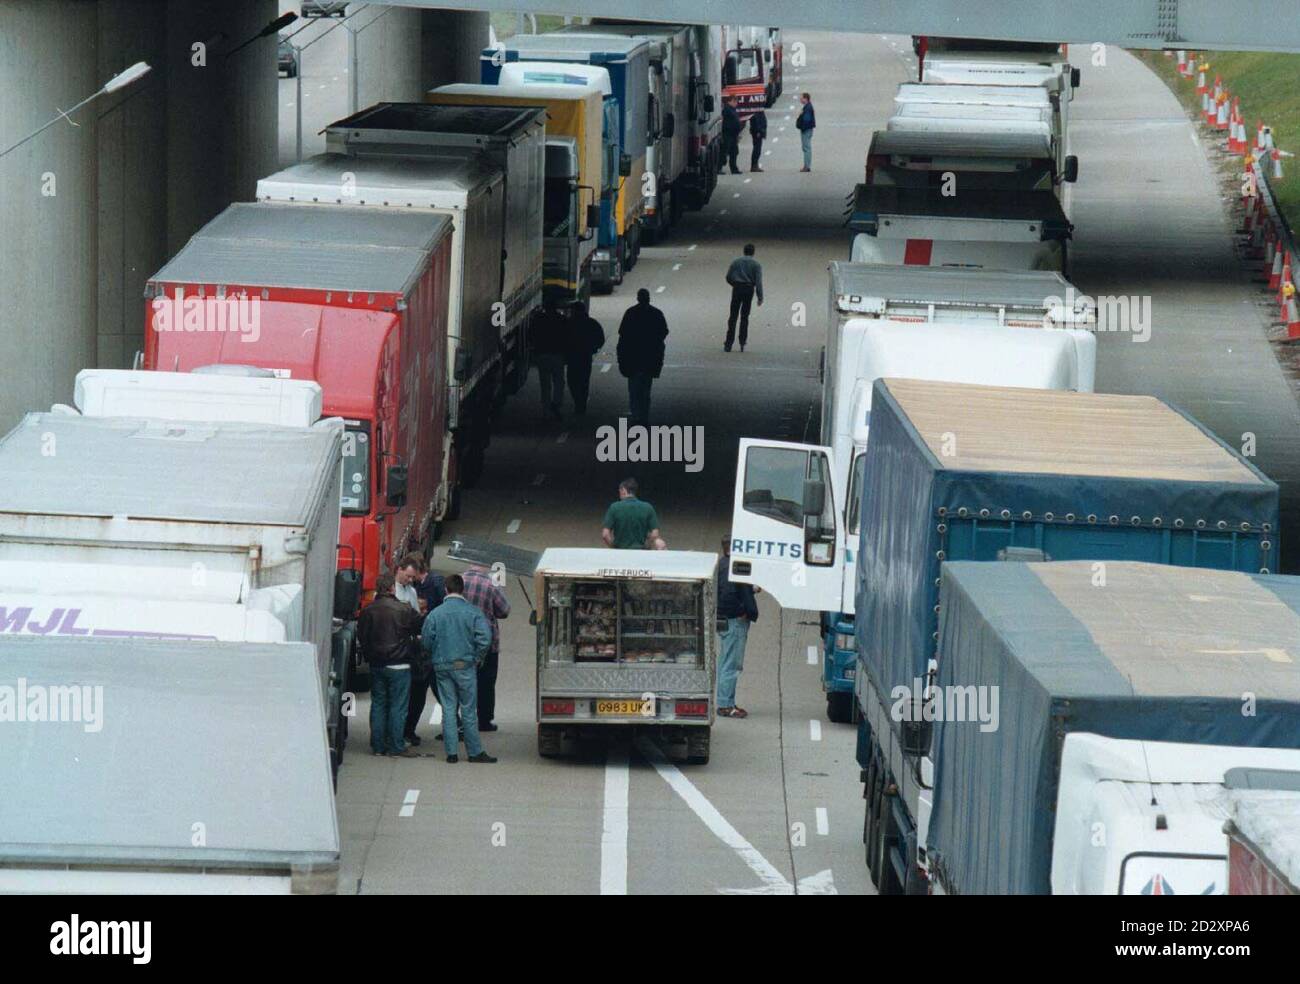 The lorry park on the M20 motorway at Folkestone in Kent today (Wednesday), following a blockade by striking French fishermen at the ports of Calais, Boulogne and Dunkirk. Part of the M20 was closed to provide the lorry park for delayed truck drivers. Photo by David Giles. See PA Storyy SEA Blockade Stock Photo